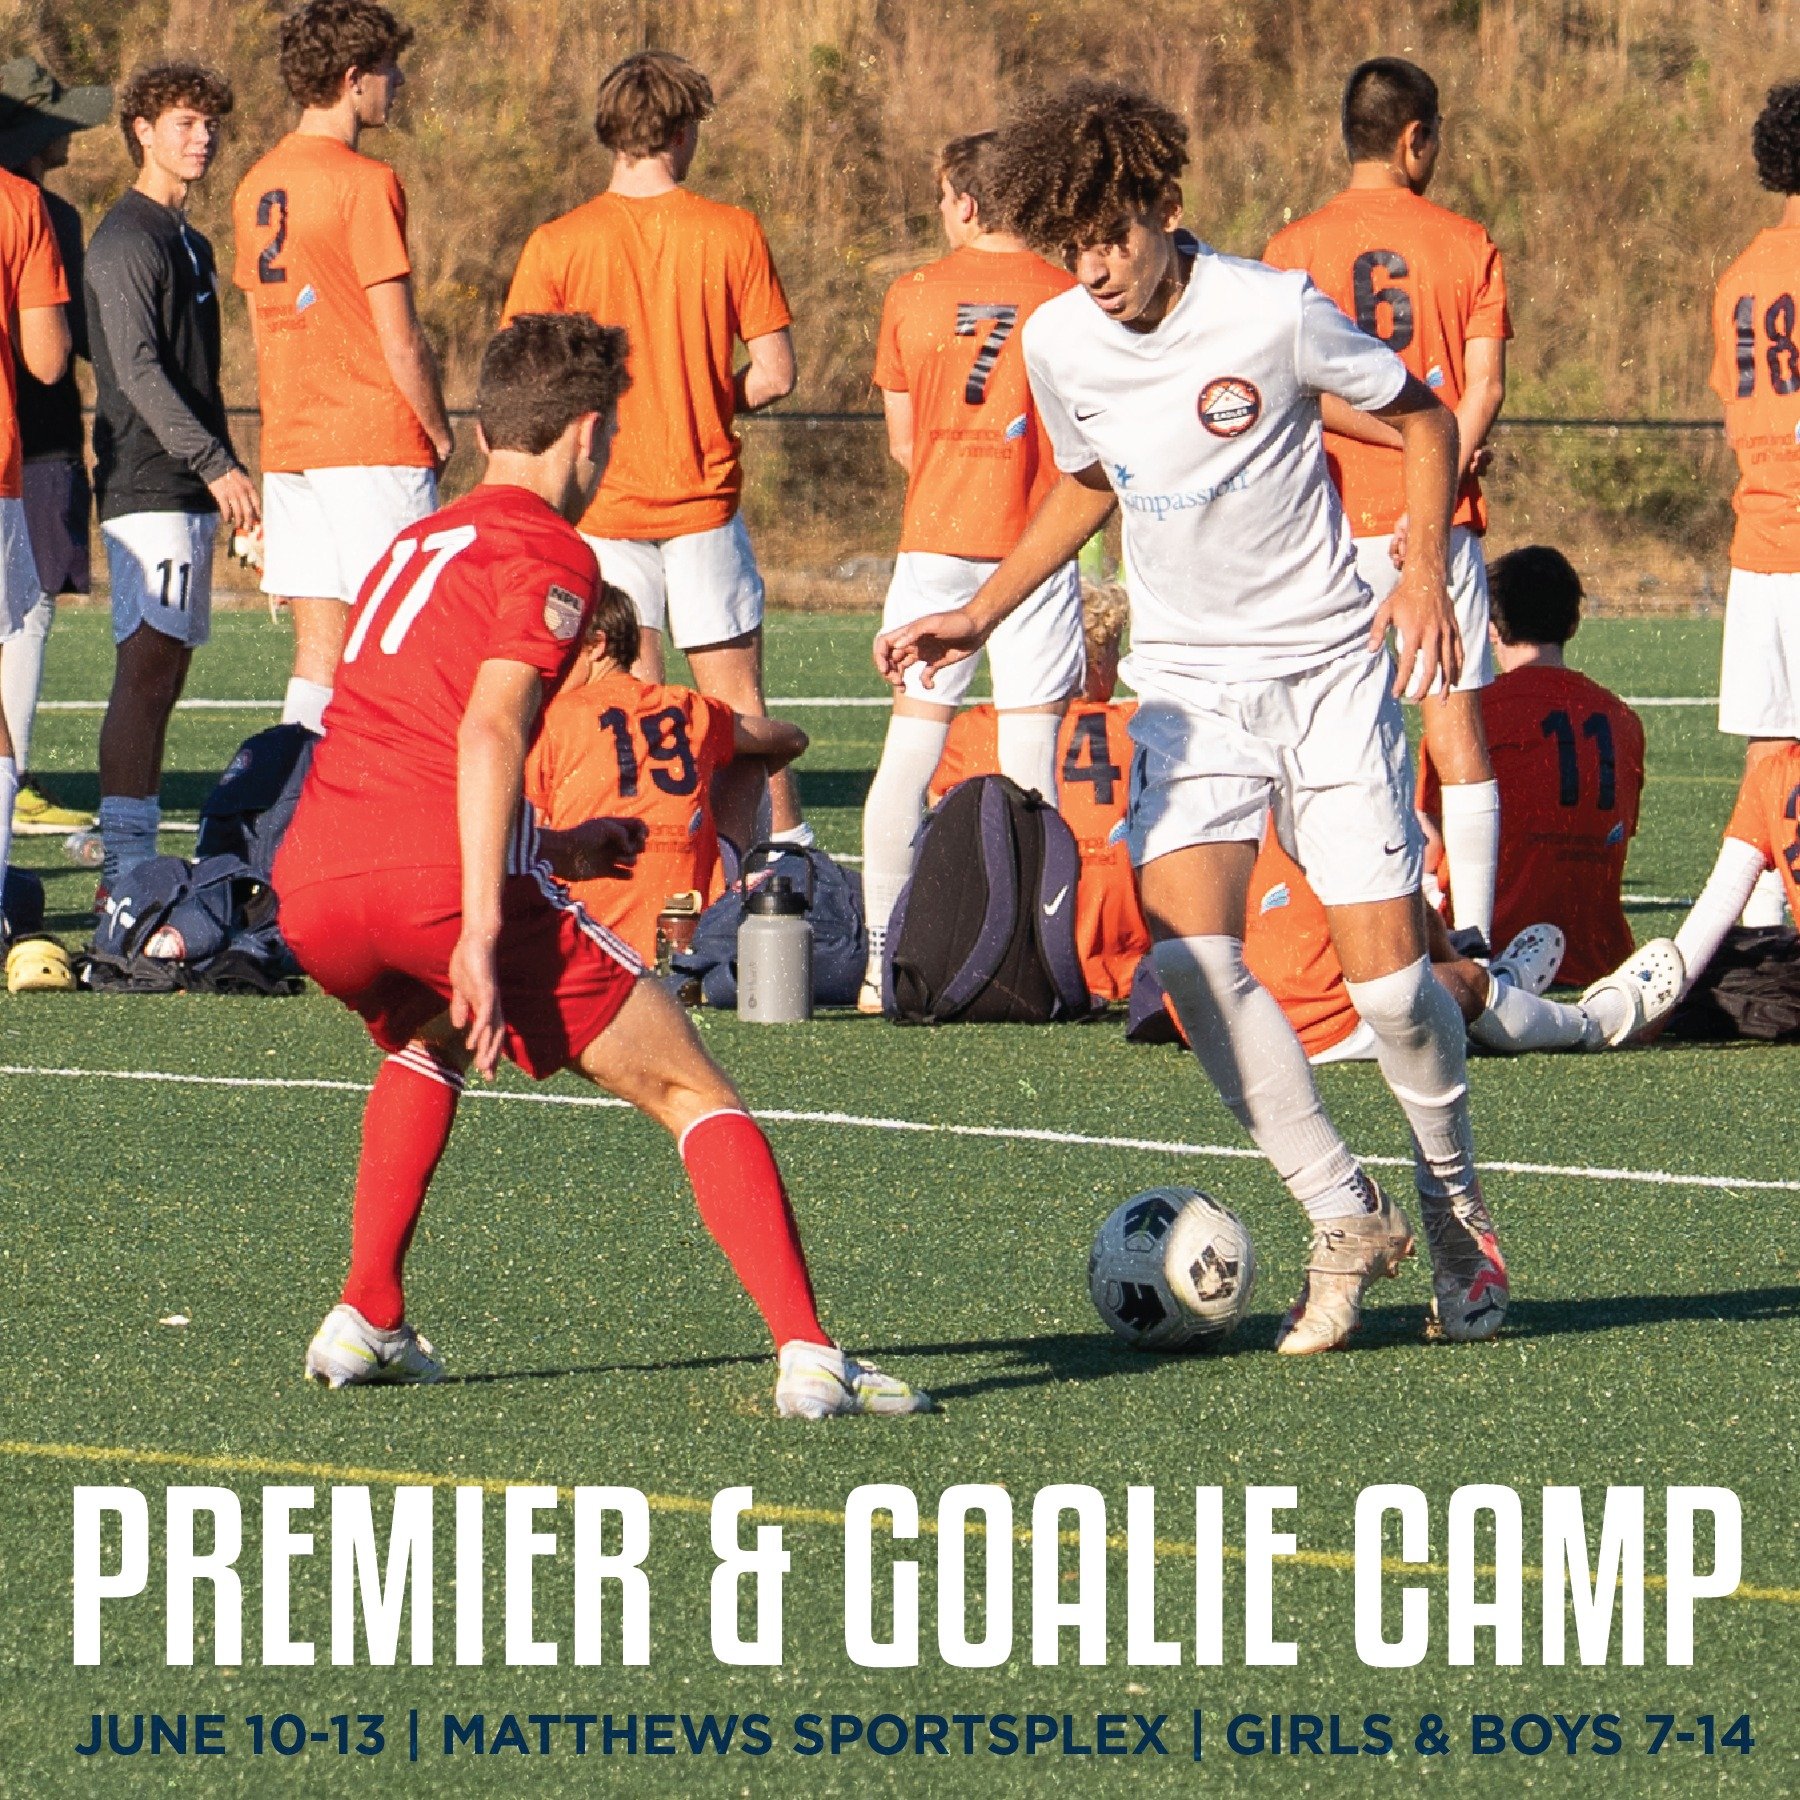 Want to elevate your soccer skills over the summer? Sign up for our Premier &amp; Goalie Camp from June 10-13. This camp is designed for players who have played at least one season at the challenge or select club level. 

Visit the link in our profil